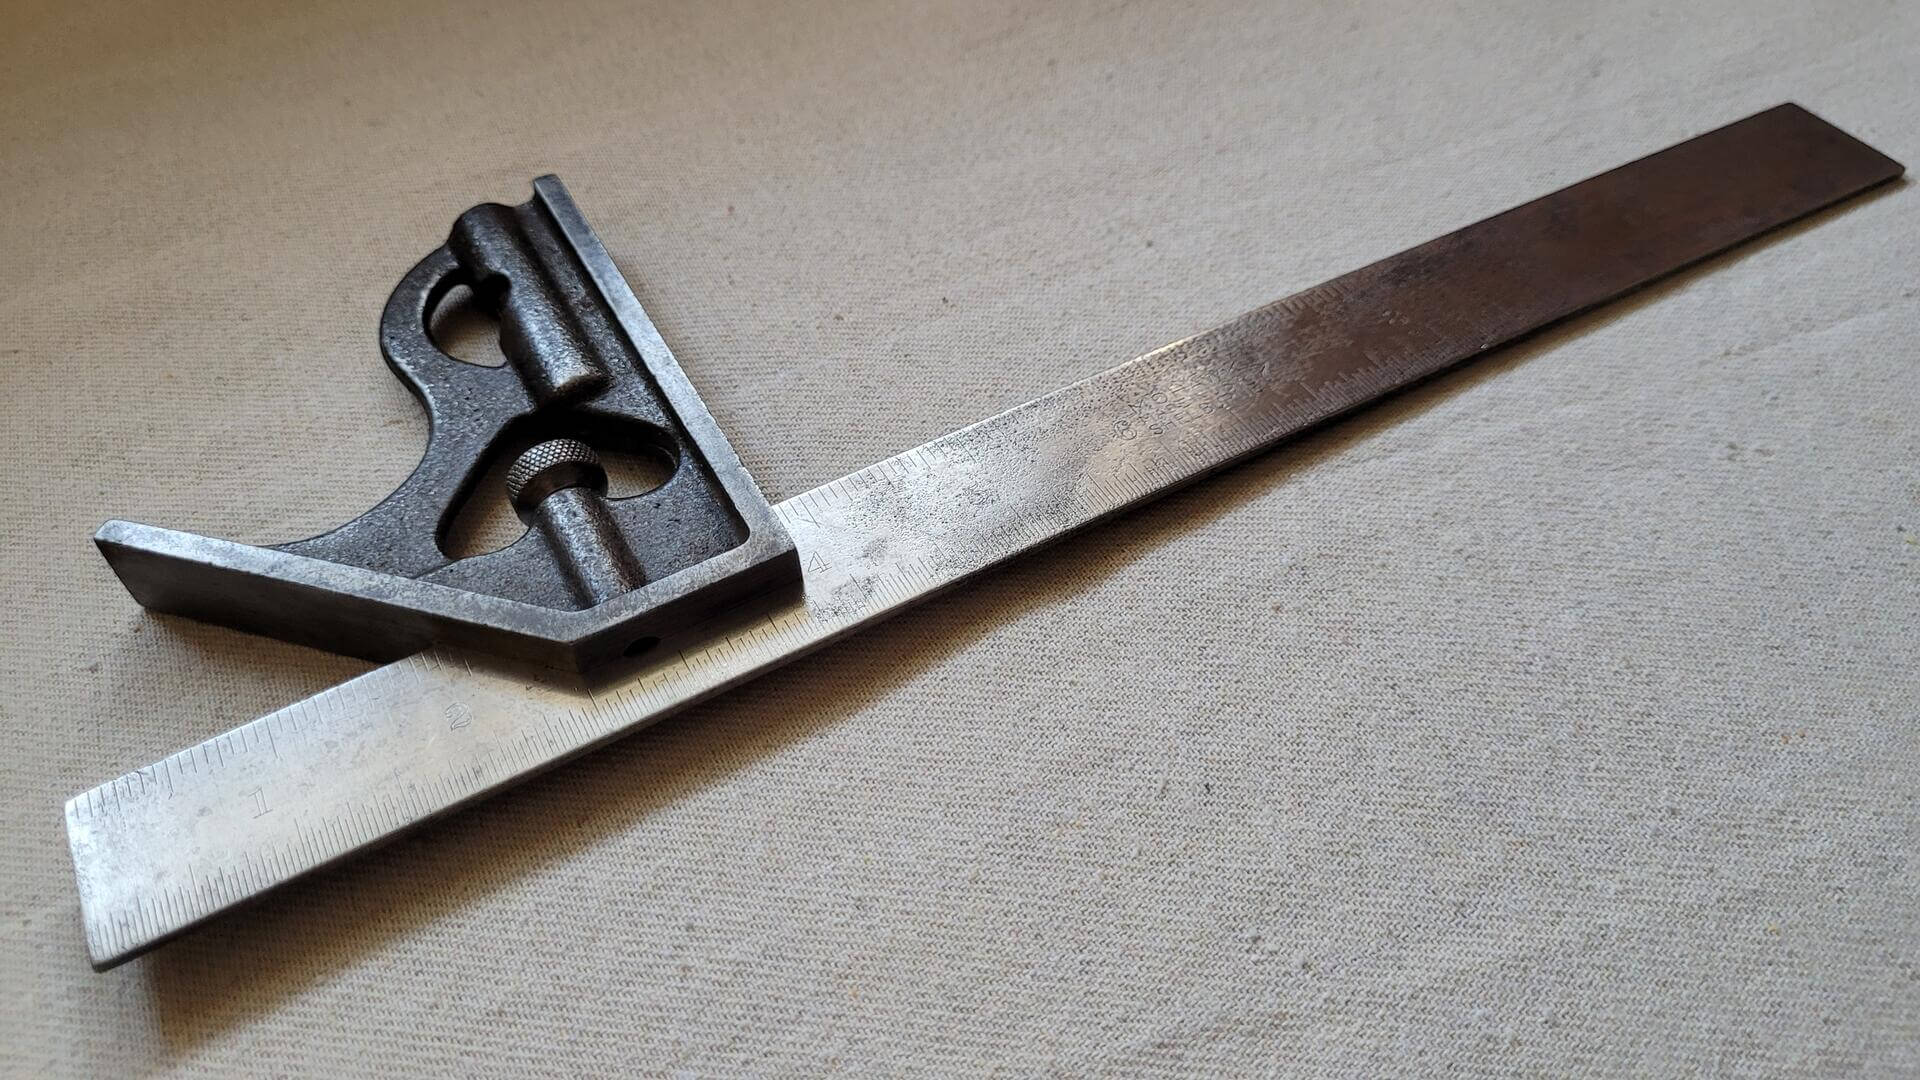 Vintage Mohawk Shelburne steel combination try square 12 inches long - Antique 1930s miller Falls made in USA collectible marking and measuring hand tools